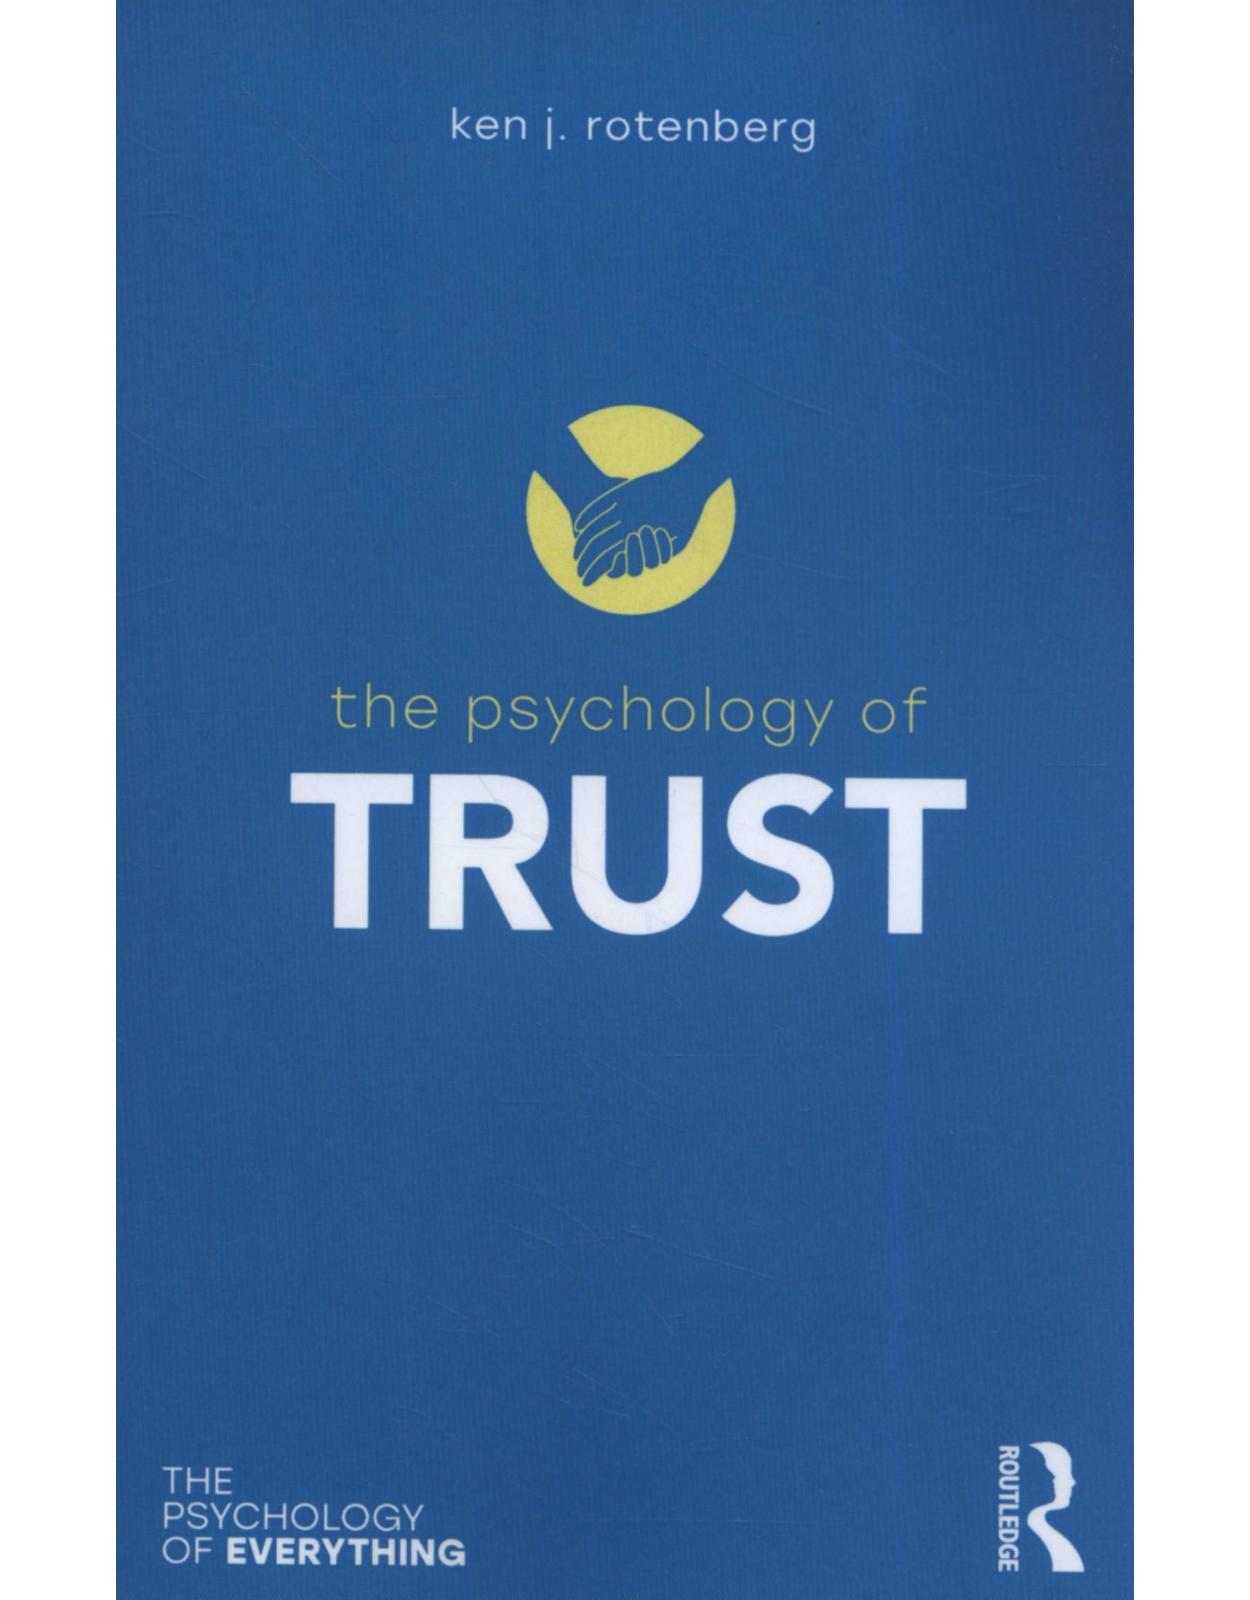 The Psychology of Trust (The Psychology of Everything)